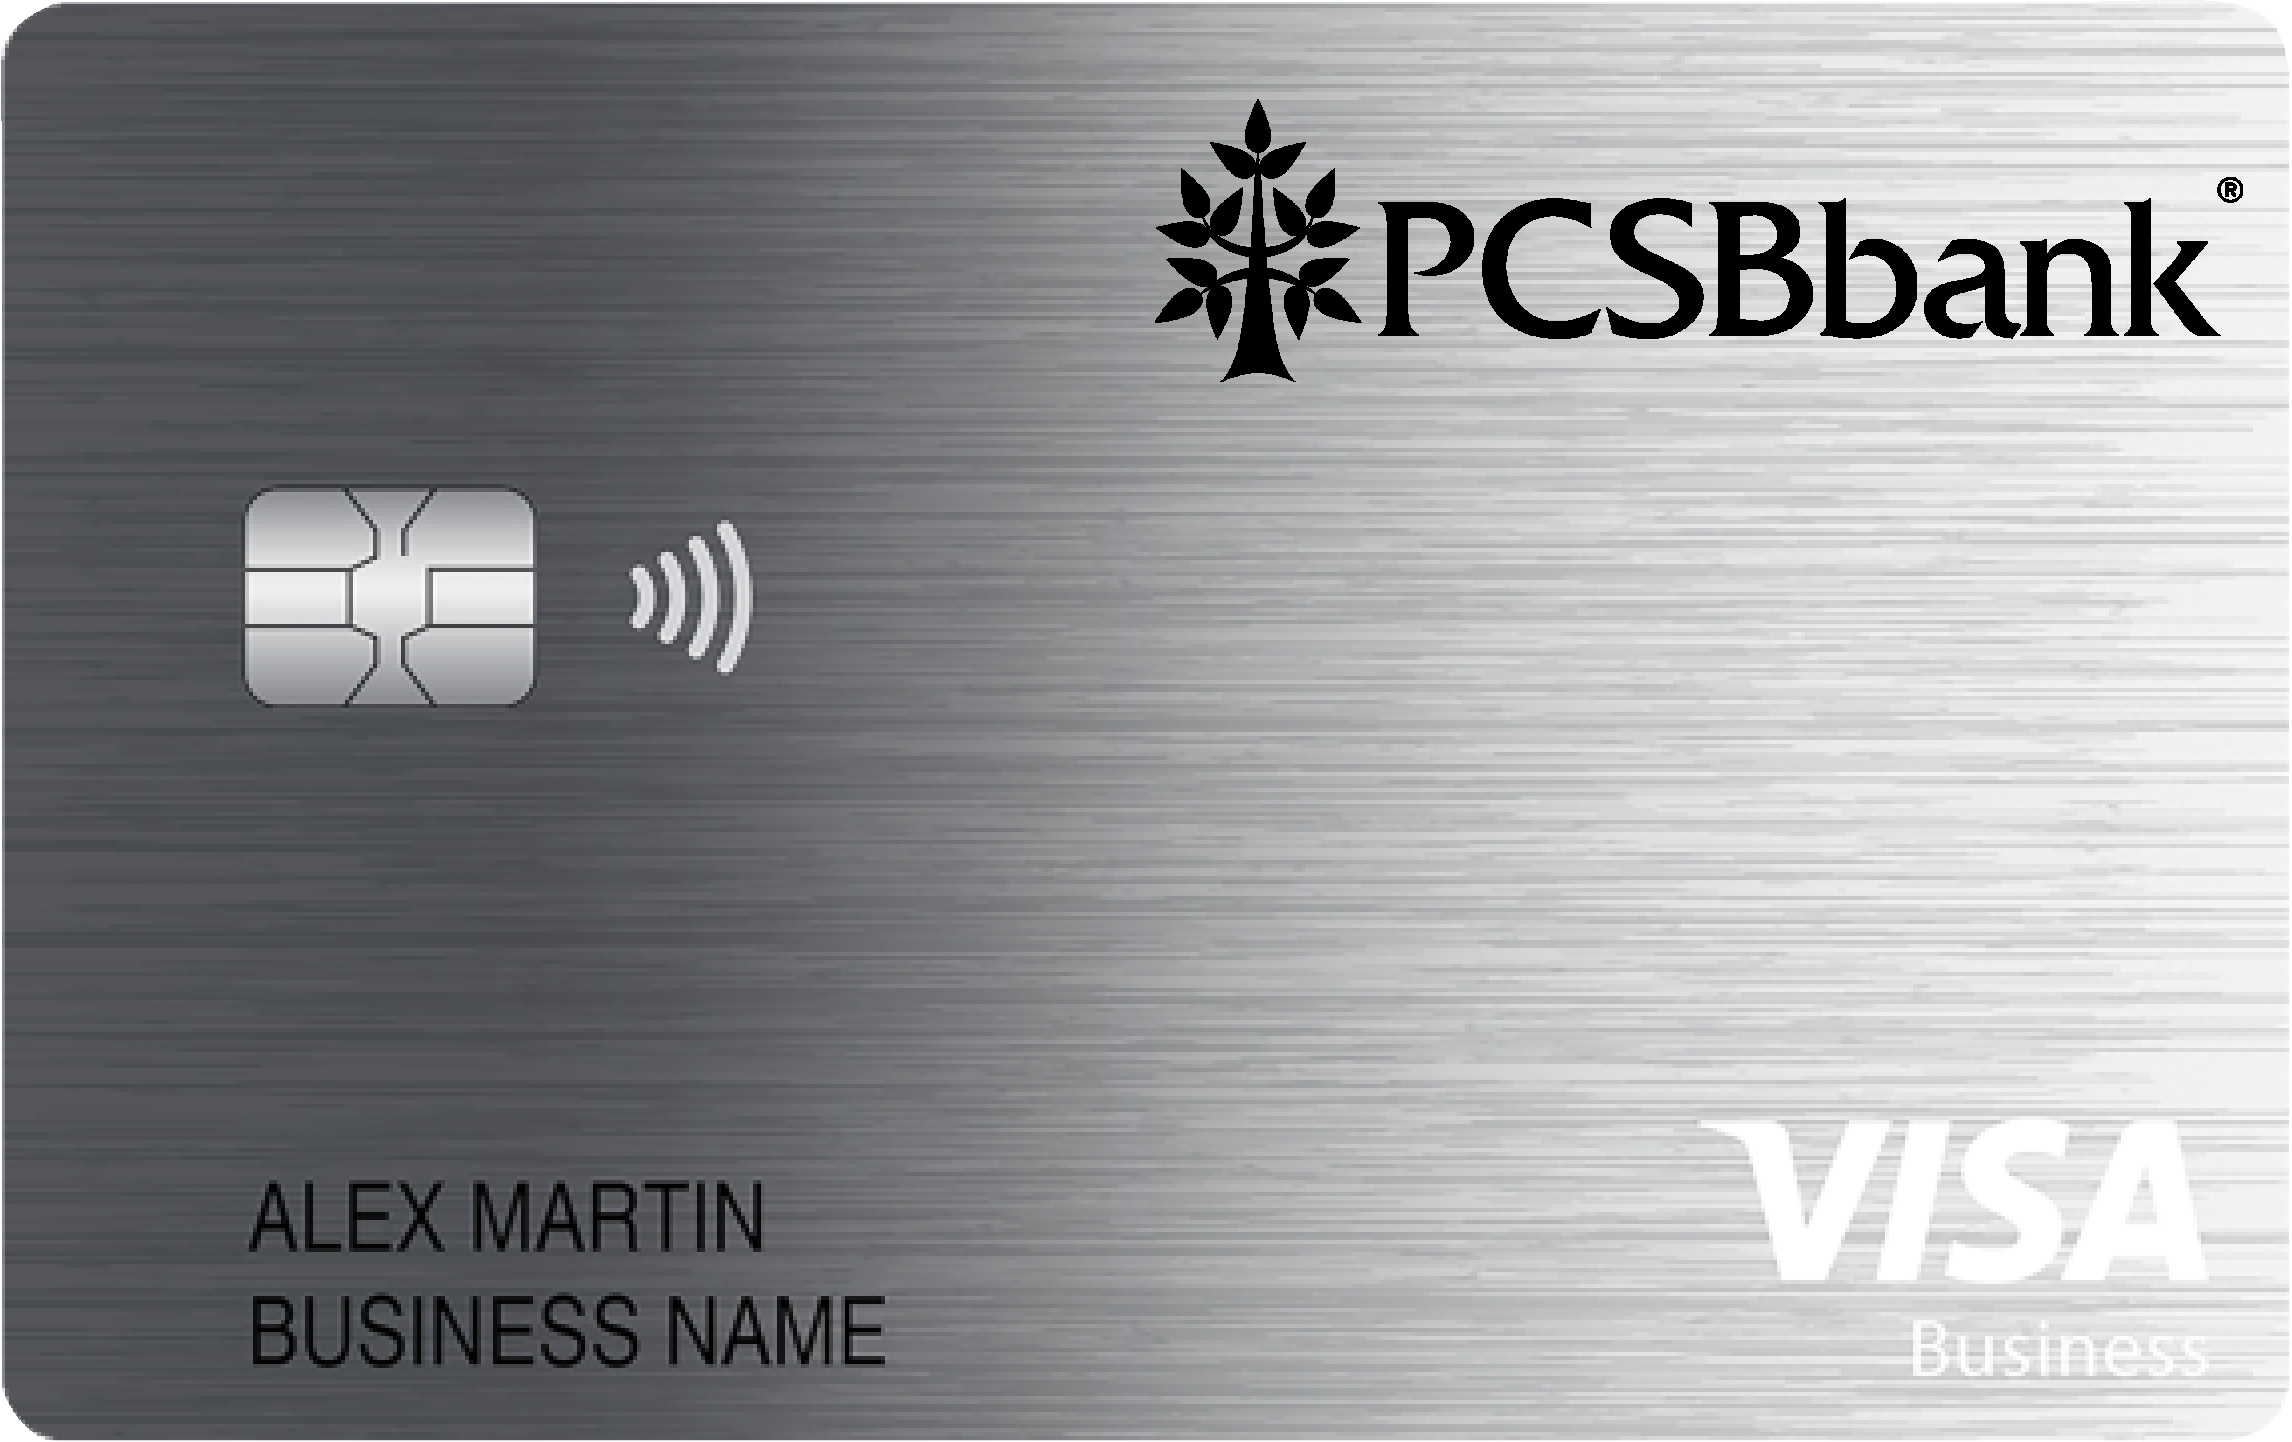 PCSB Bank Business Real Rewards Card